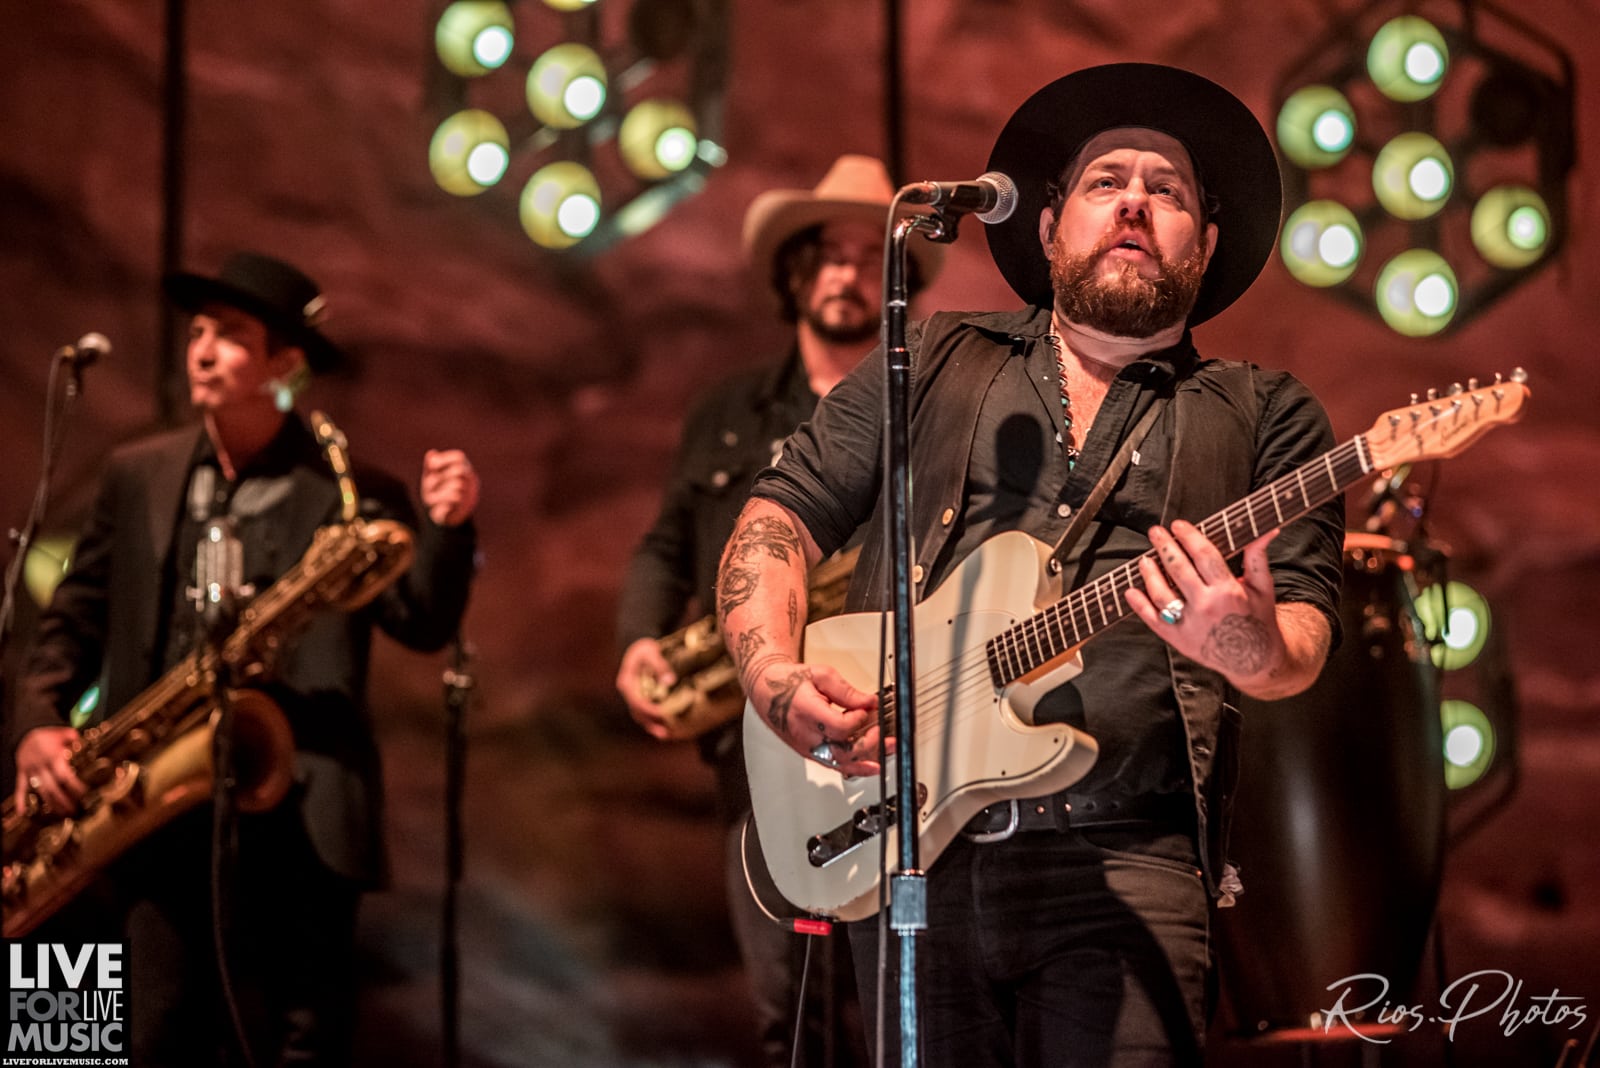 Who is opening for Nathaniel Rateliff at Red Rocks?